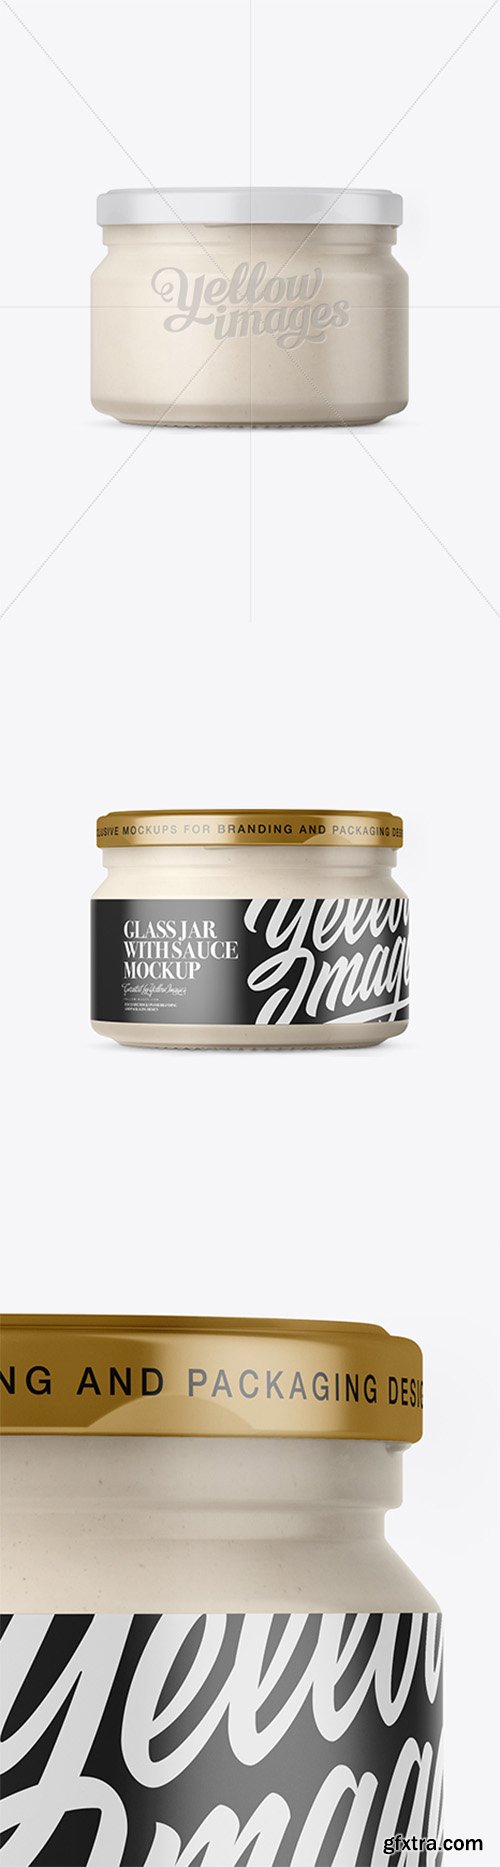 250ml Clear Glass Jar With Garlic Sauce Mockup - Front View 19457